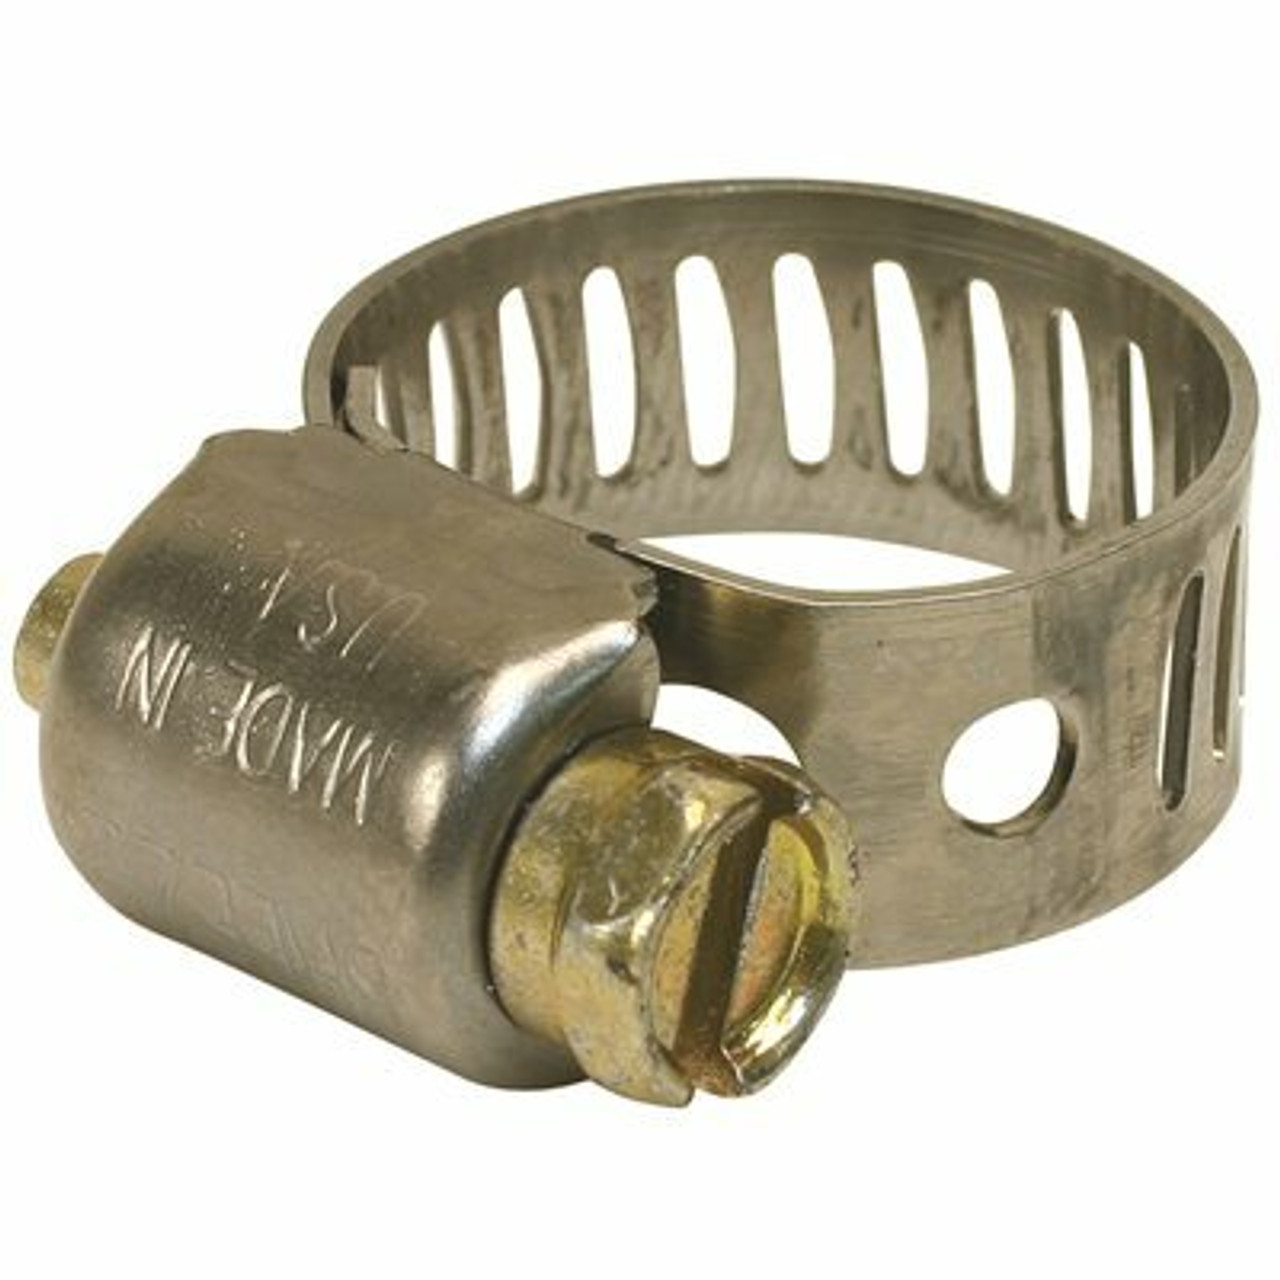 Breeze Clamp Breeze Hose Clamp, Stainless Steel, 3-1/16 In. To 4 In., Pack Of 10